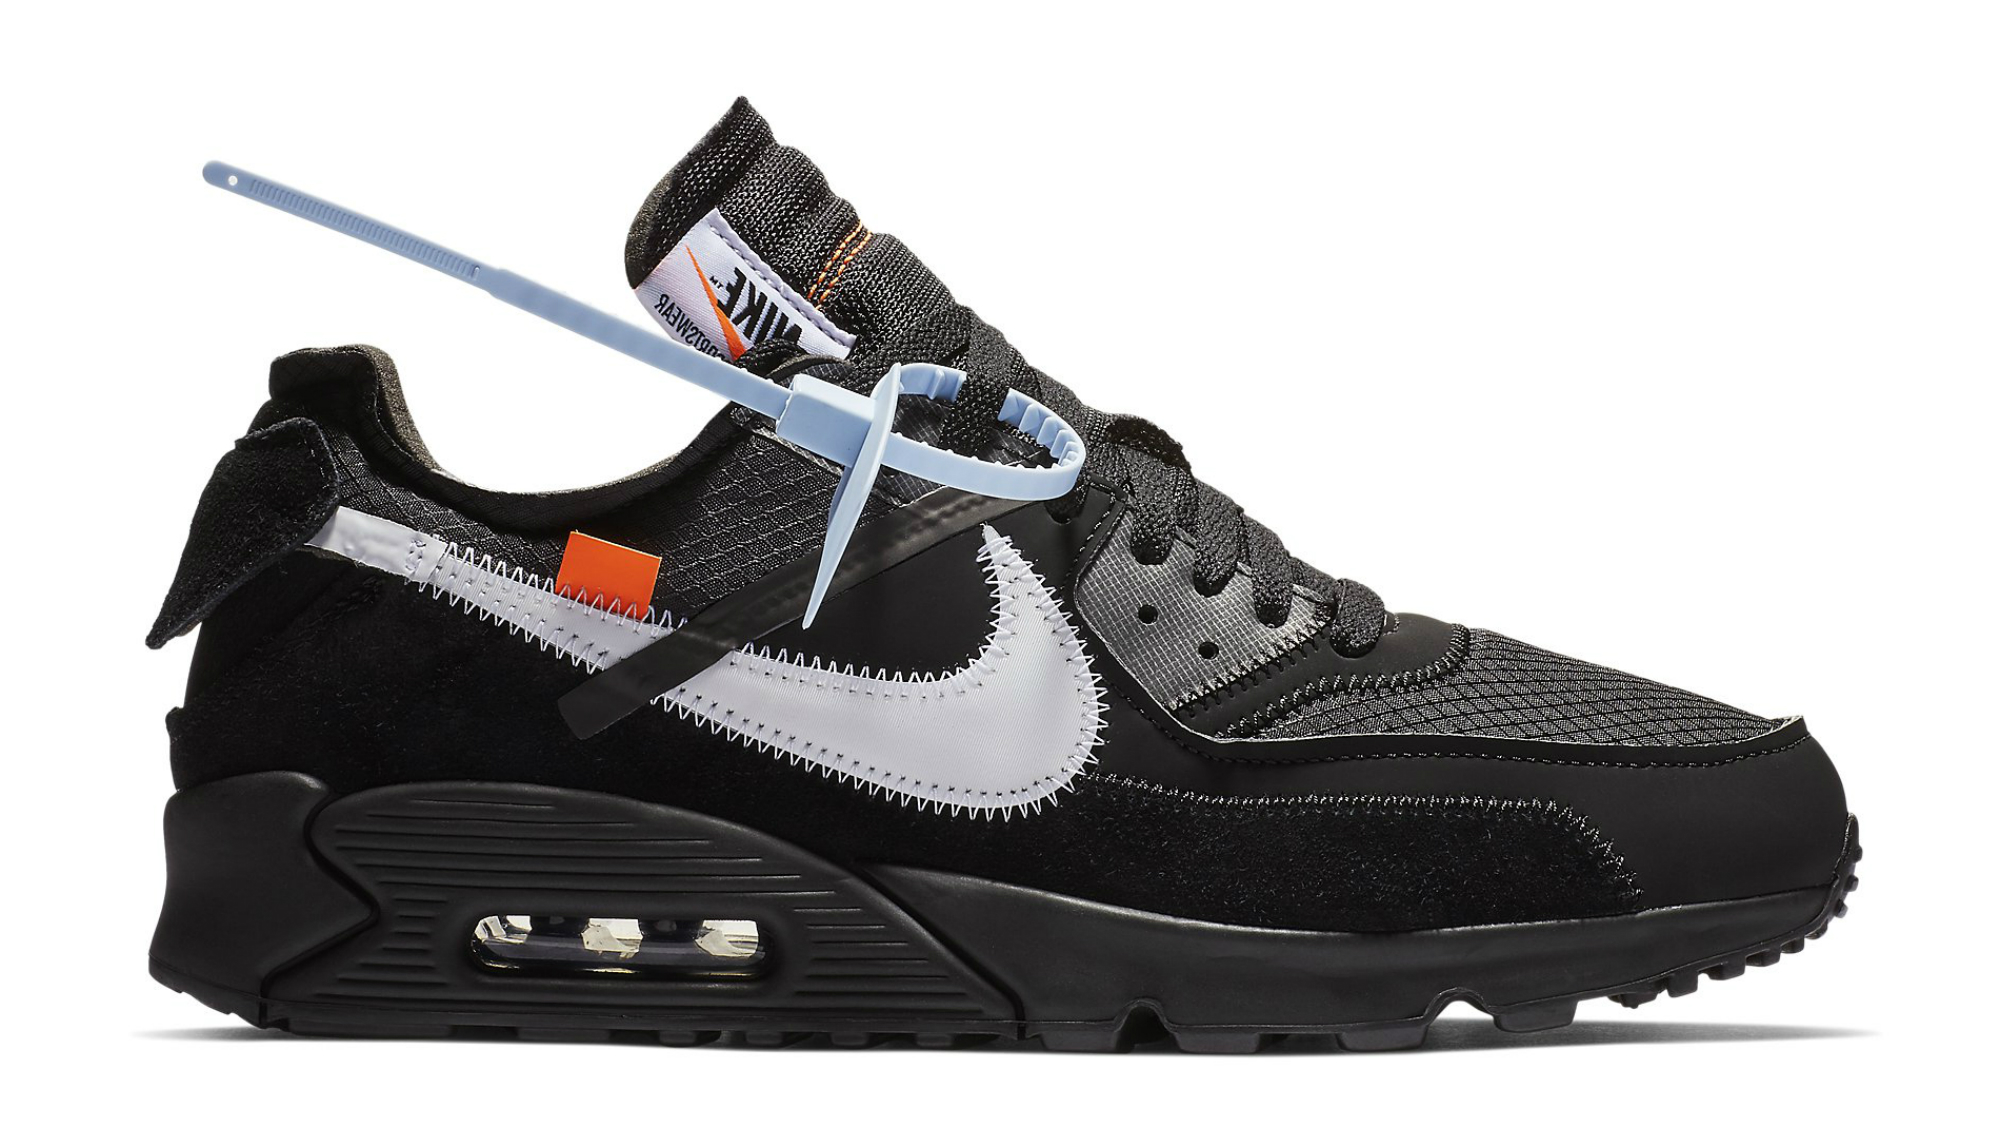 off white nike air max 90 black aa7293 001 release date